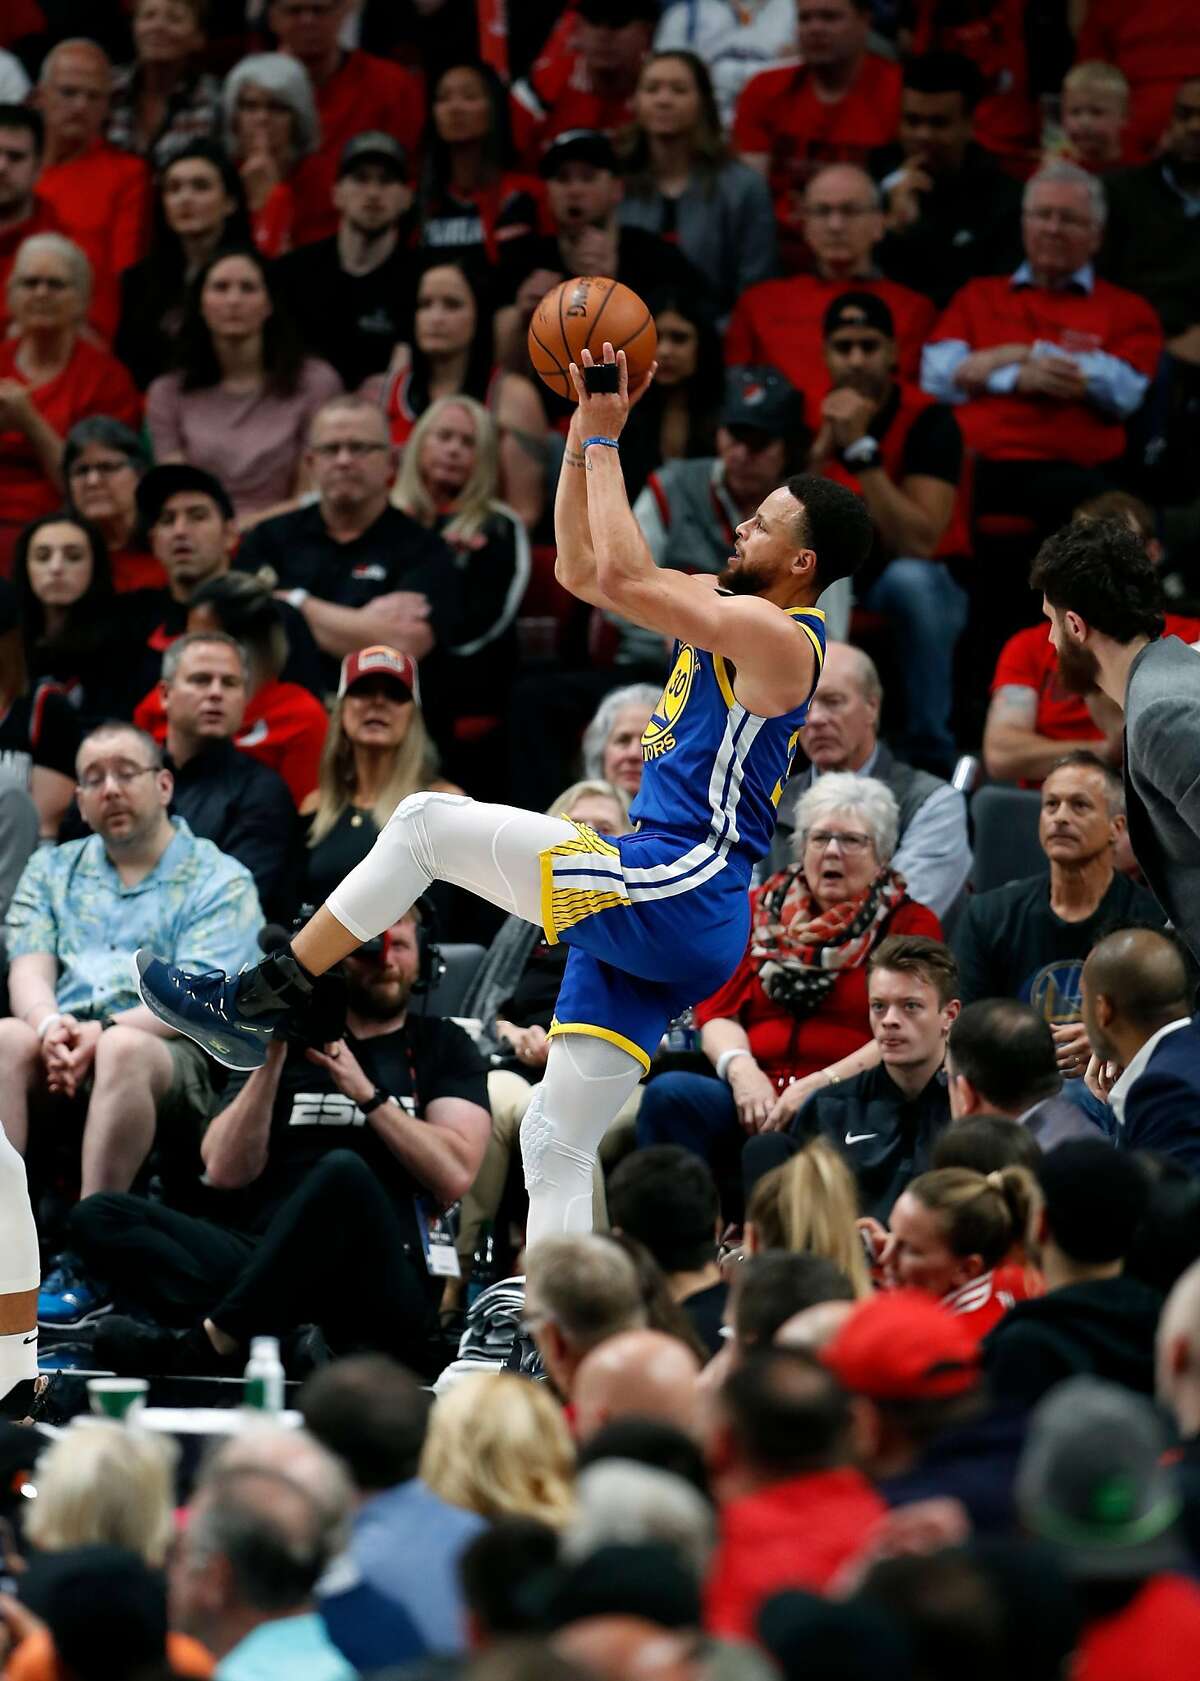 Golden State Warriors' Stephen Curry shoots a 3-pointer in 4th quarter of Warriors' 119-117 overtime win over Portland Trail Blazers in NBA Western Conference Finals' Game 4 at Moda Center in Portland, Oregon on Monday, May 20, 2019.